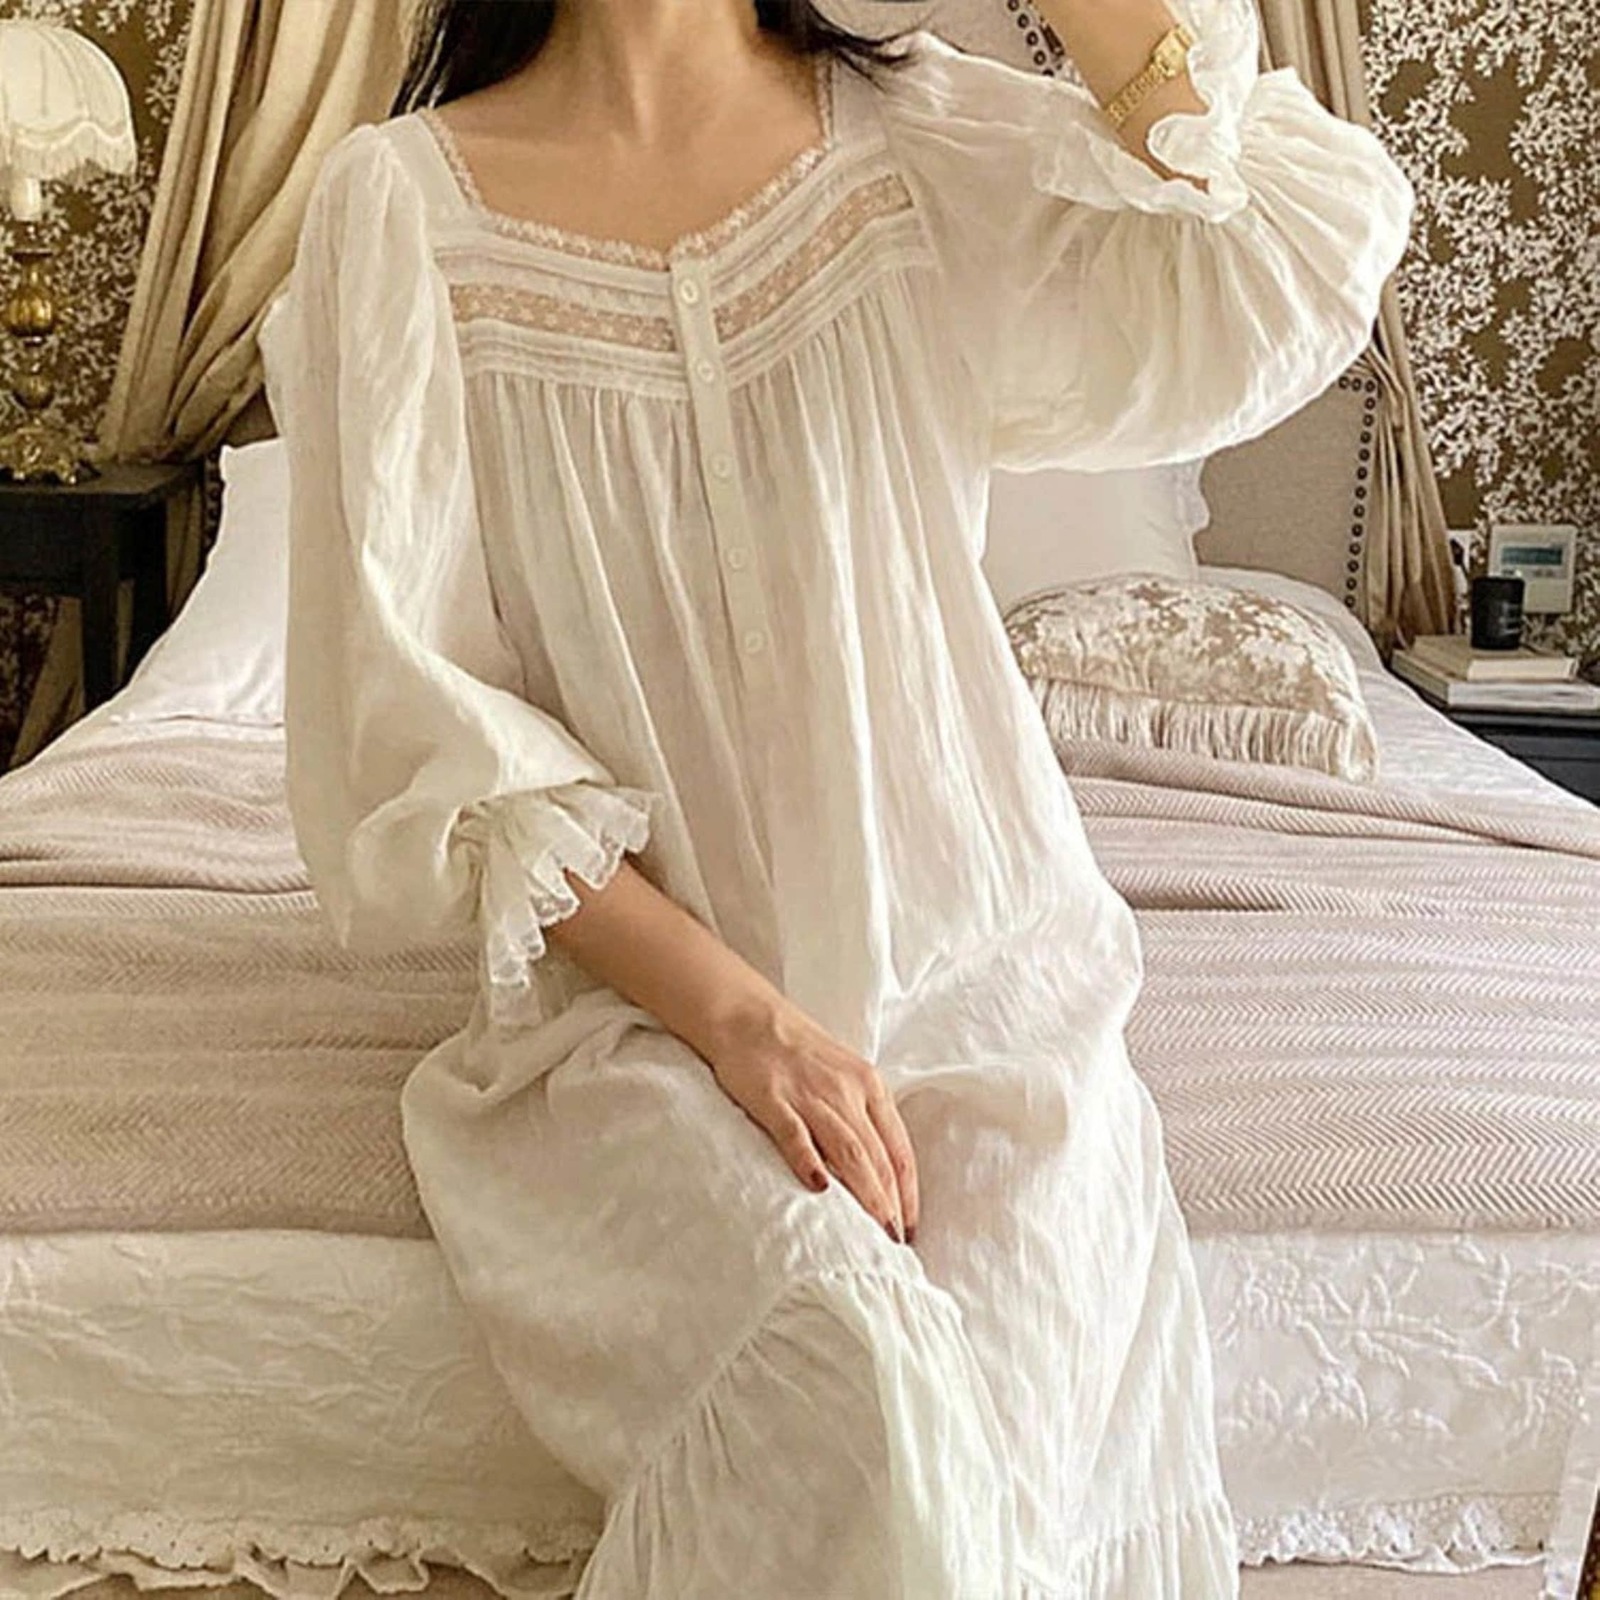 Primary image for Vintage White Victorian Nightgown, Sheer Sexy Nightgown White Edwardian Vintage 